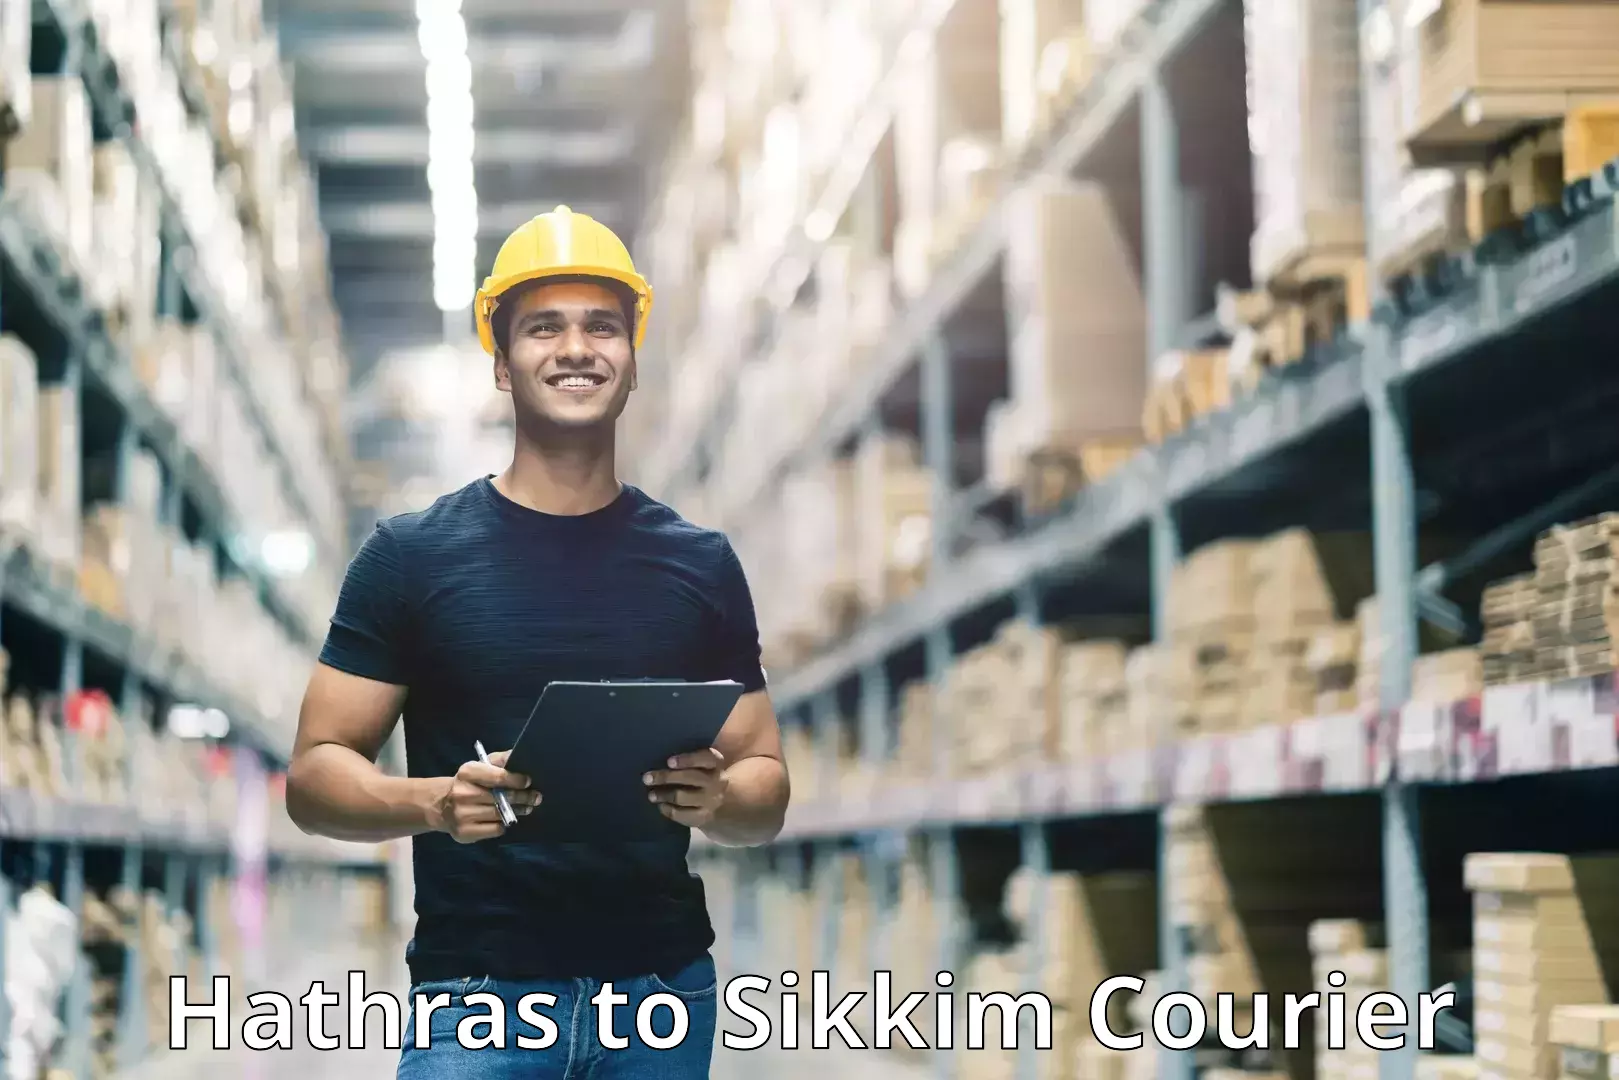 Customer-focused courier Hathras to Sikkim